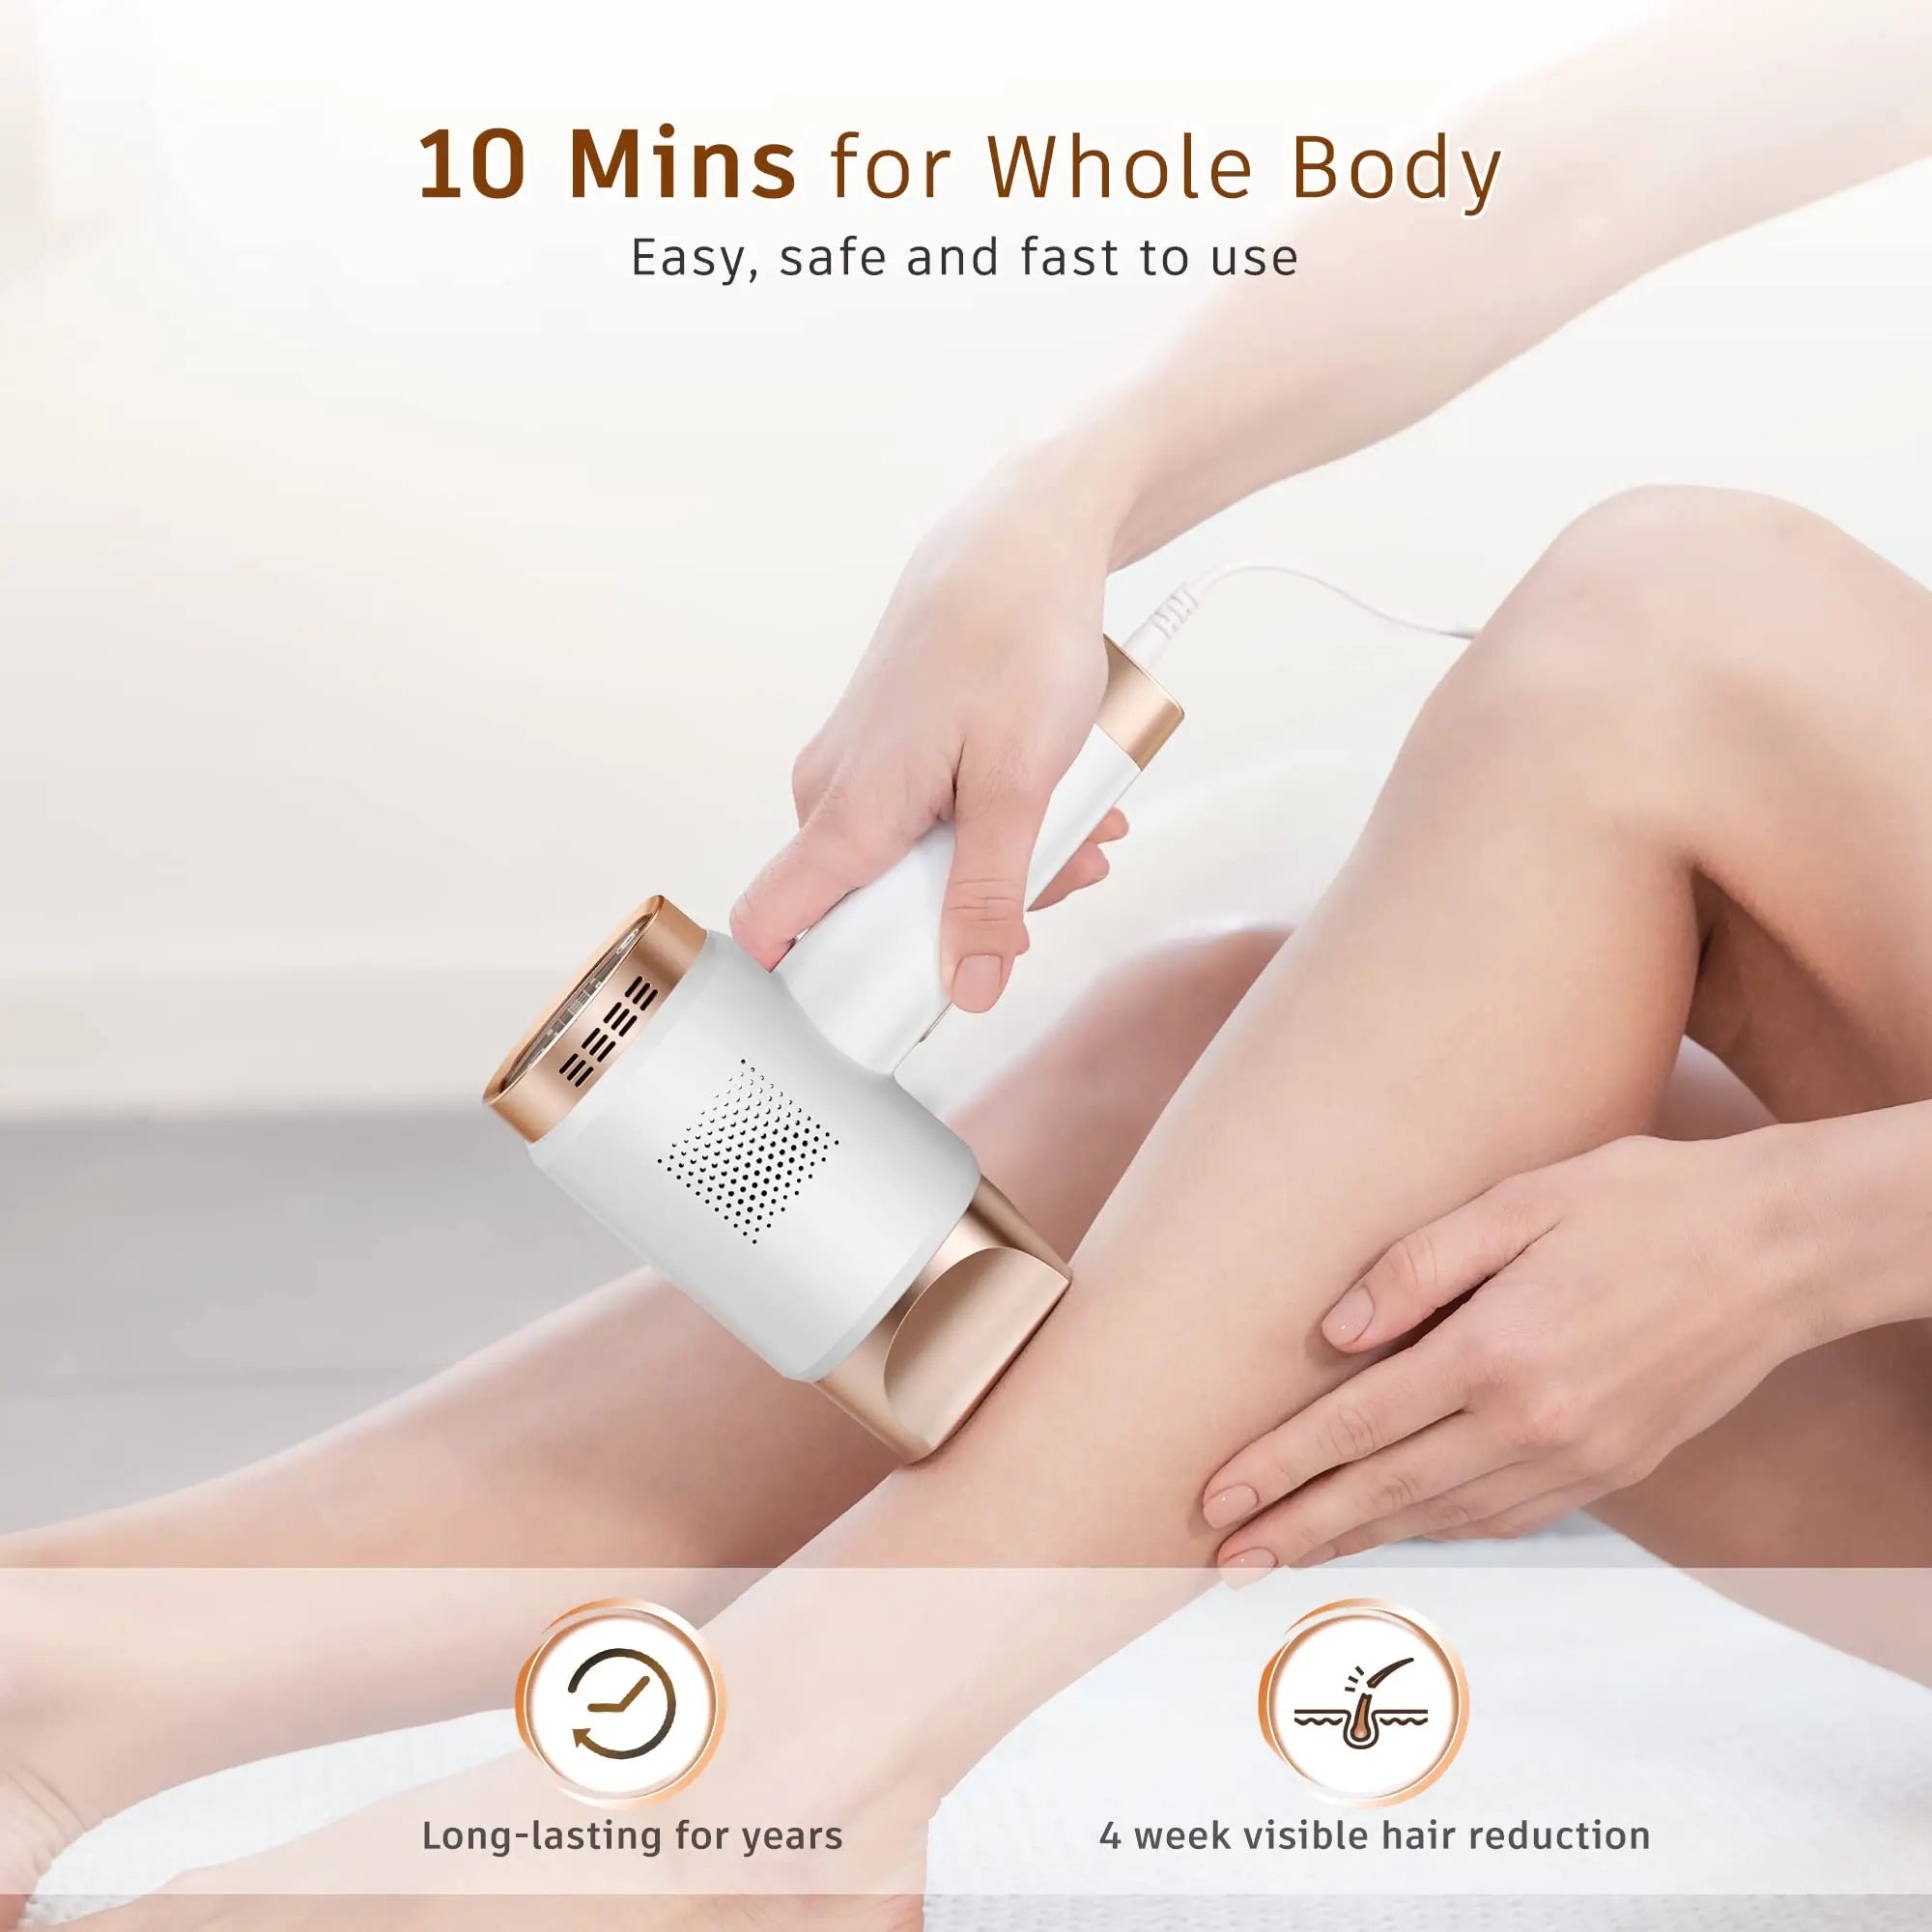 Aminzer ipl laser hair removal 999,999 flashes 3 in 1